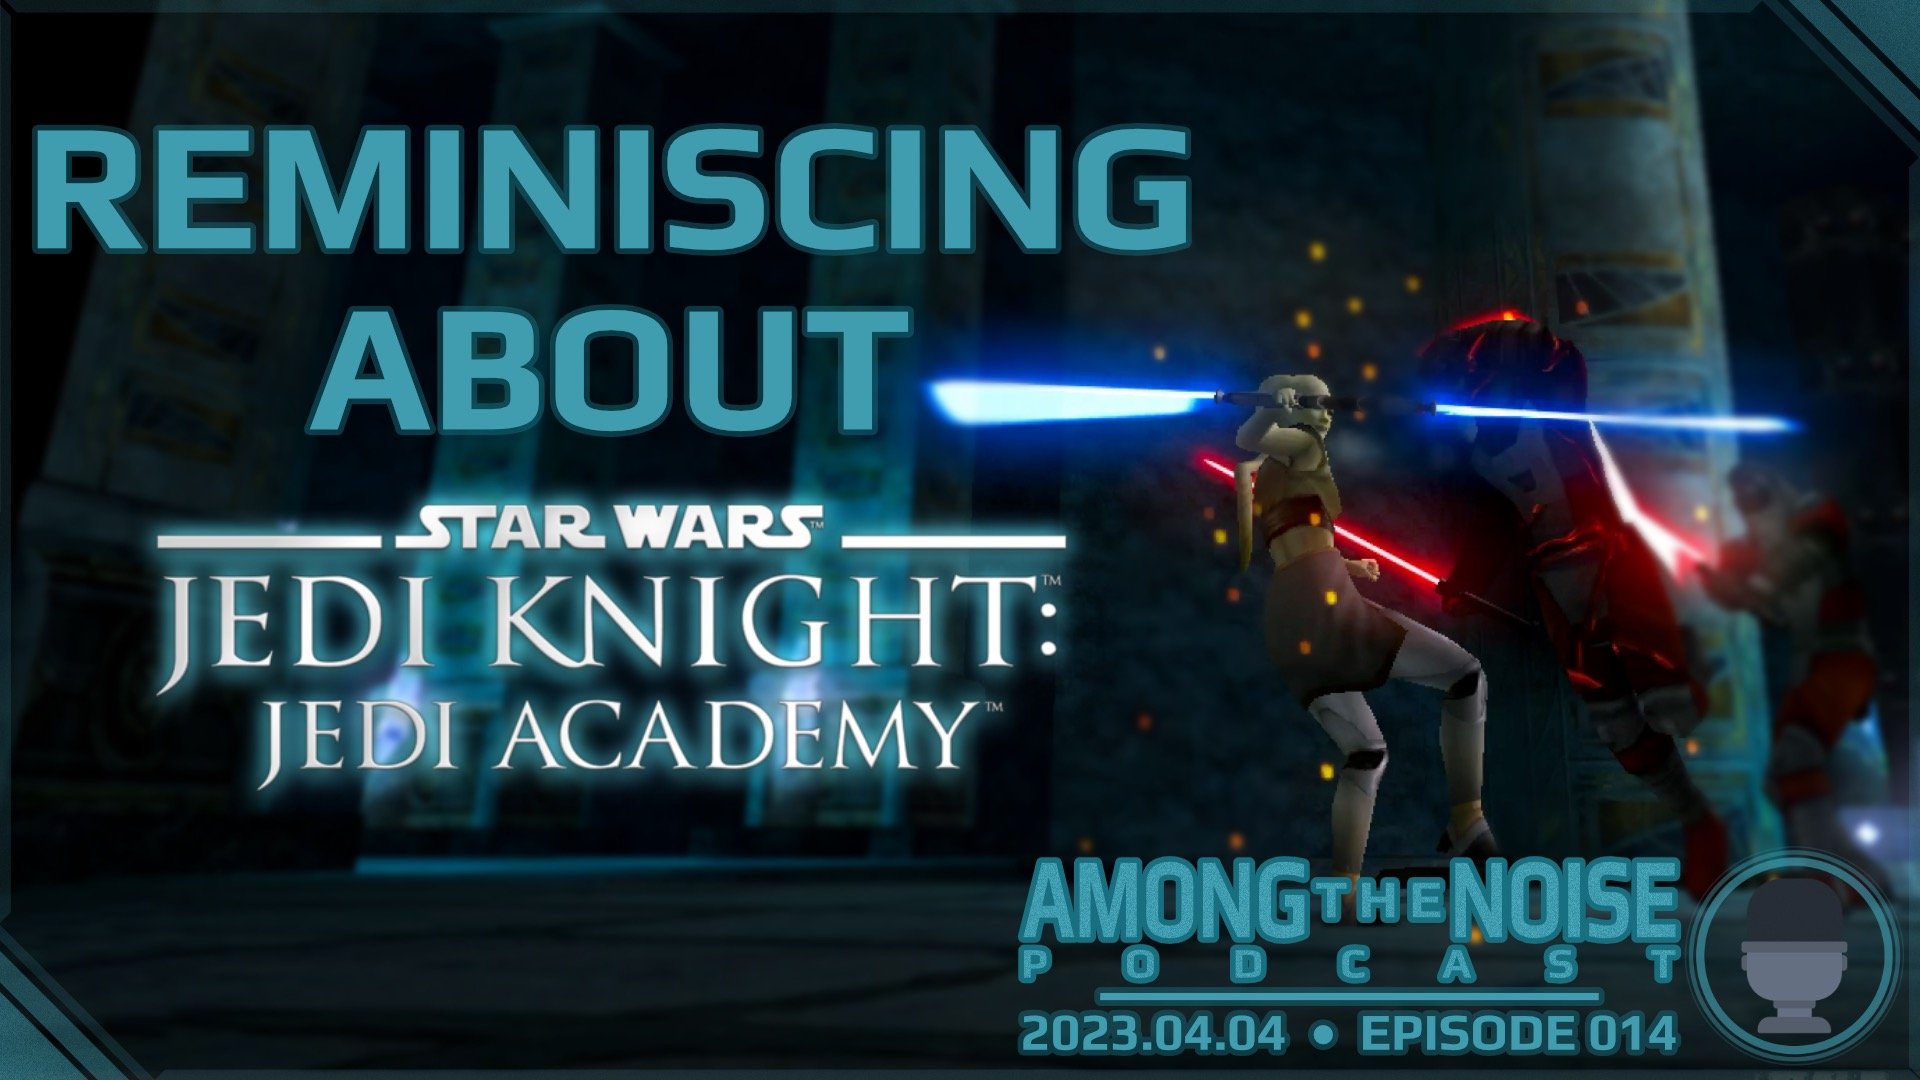 More information about "Reminiscing about Jedi Academy"